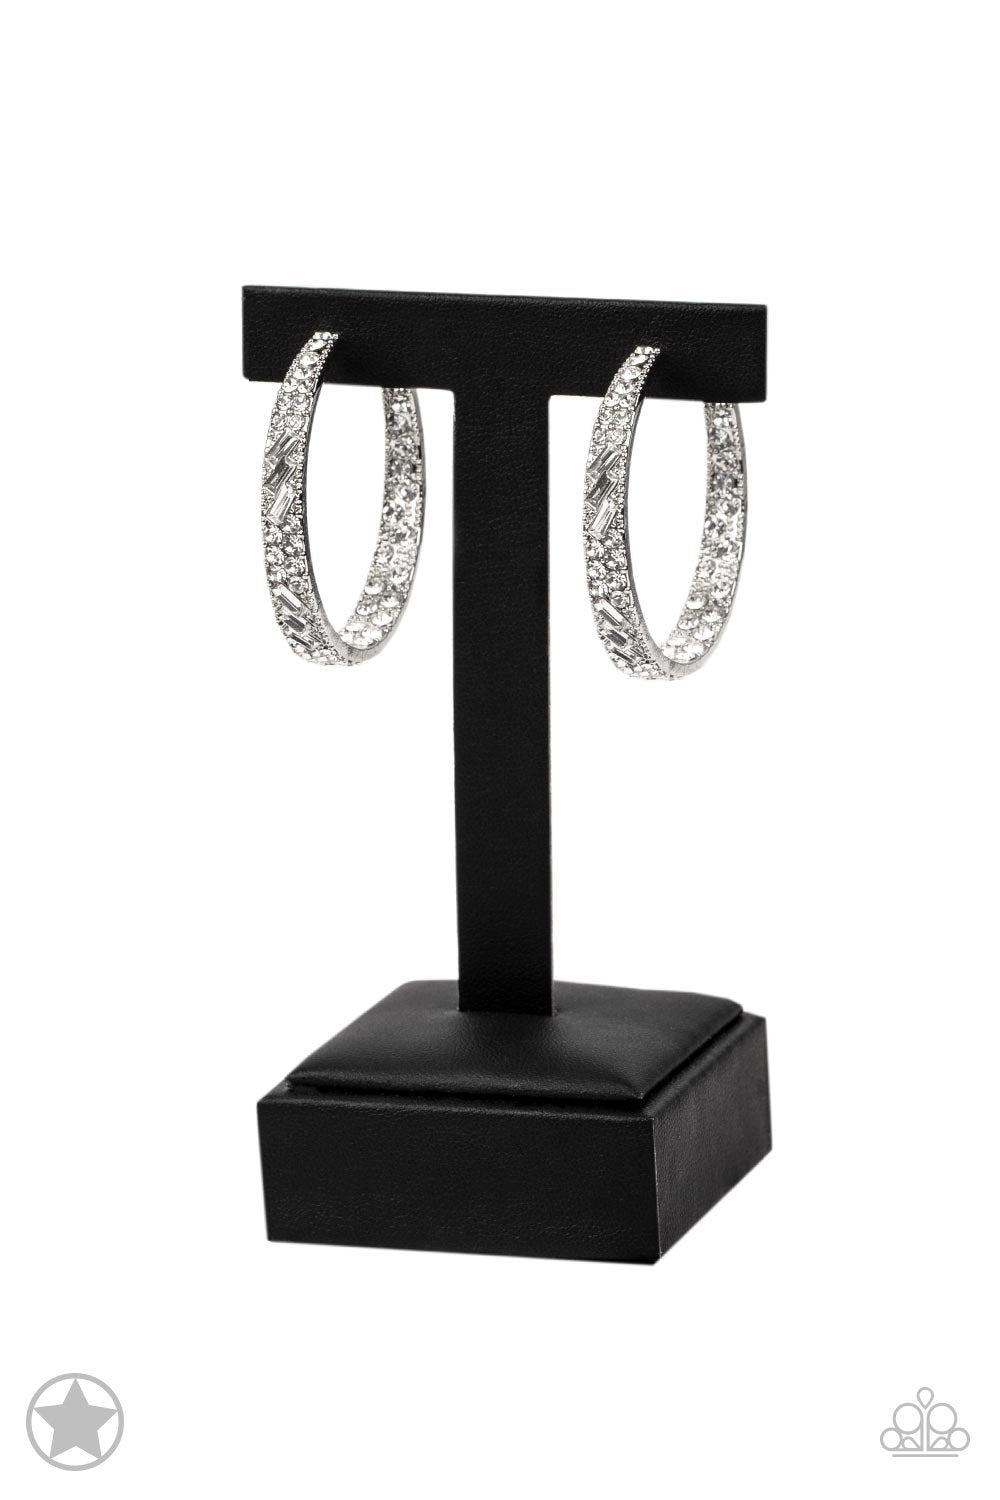 Glitzy by Association White Rhinestone Hoop Earrings - Paparazzi Accessories- on bust -CarasShop.com - $5 Jewelry by Cara Jewels